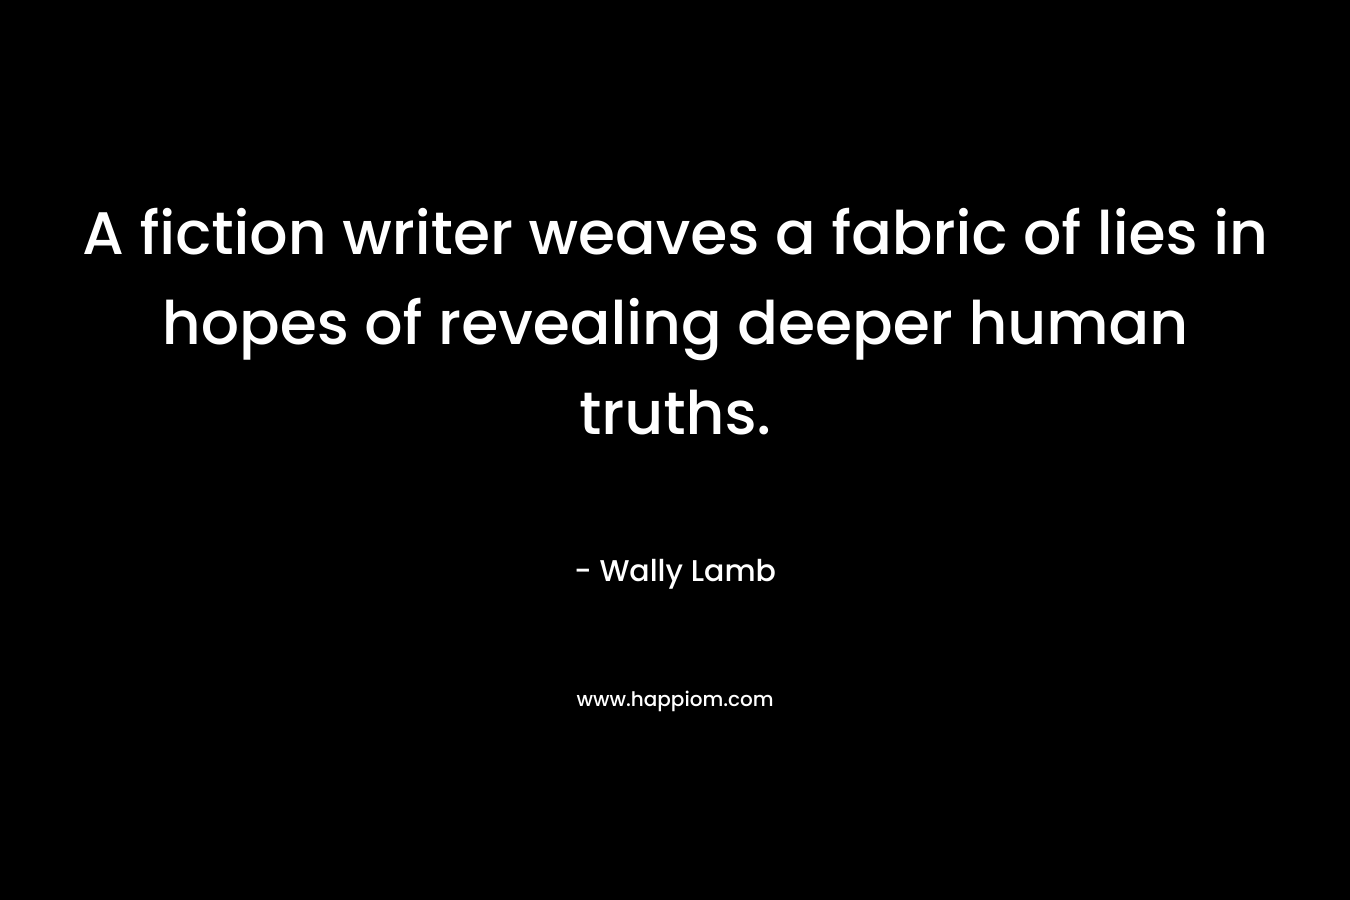 A fiction writer weaves a fabric of lies in hopes of revealing deeper human truths. – Wally Lamb